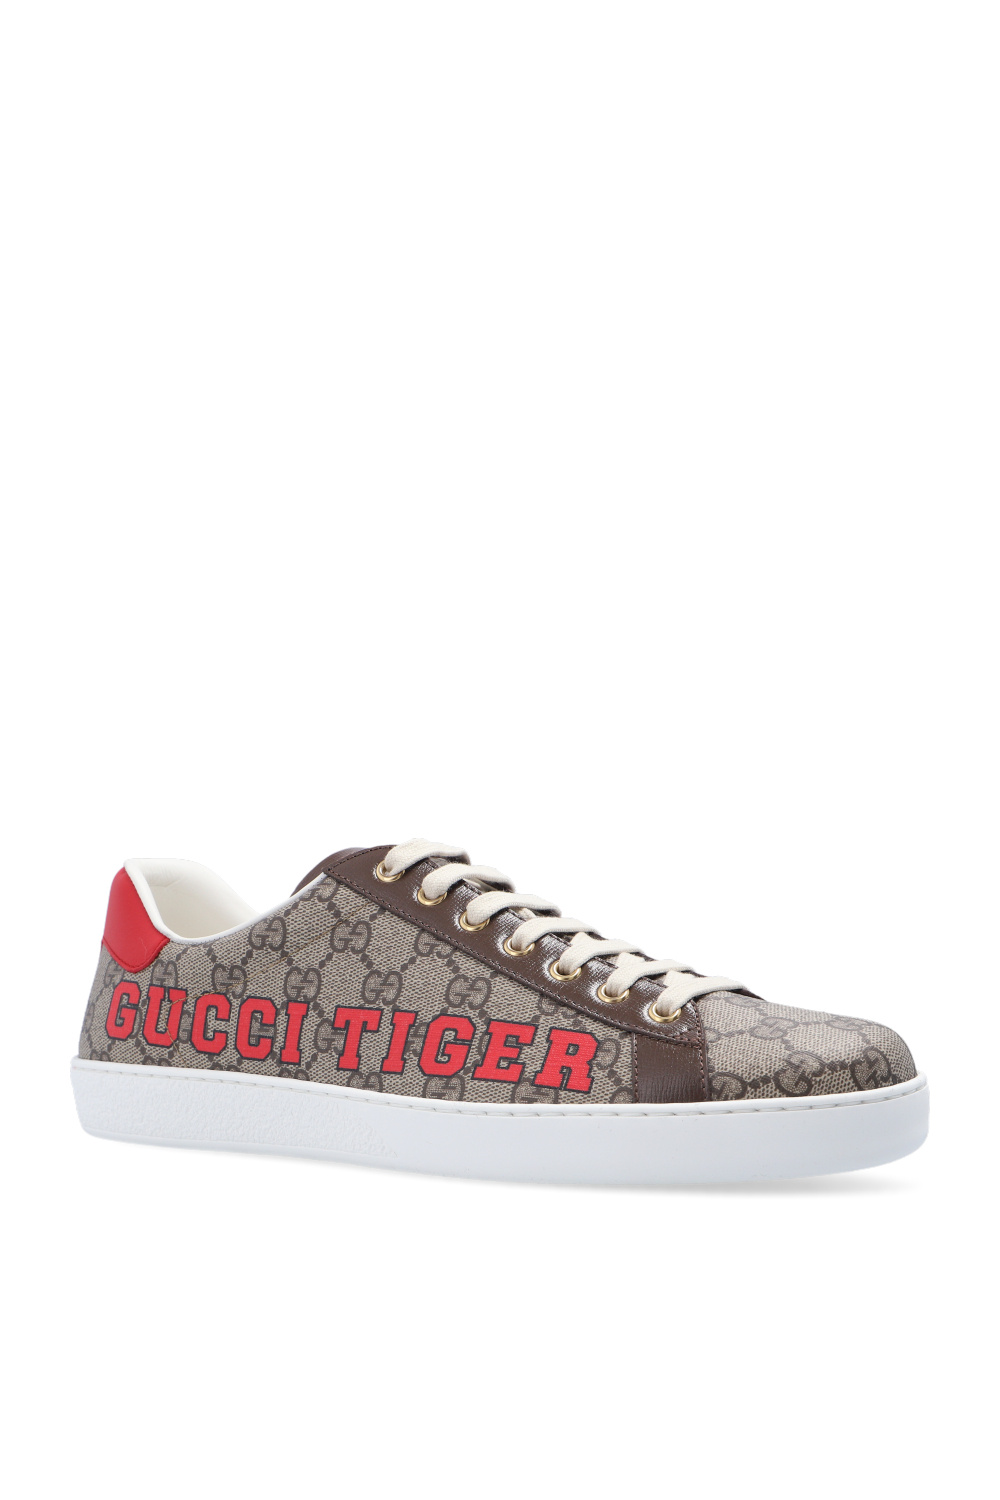 Gucci Sneakers from the ‘Gucci Tiger’ collection